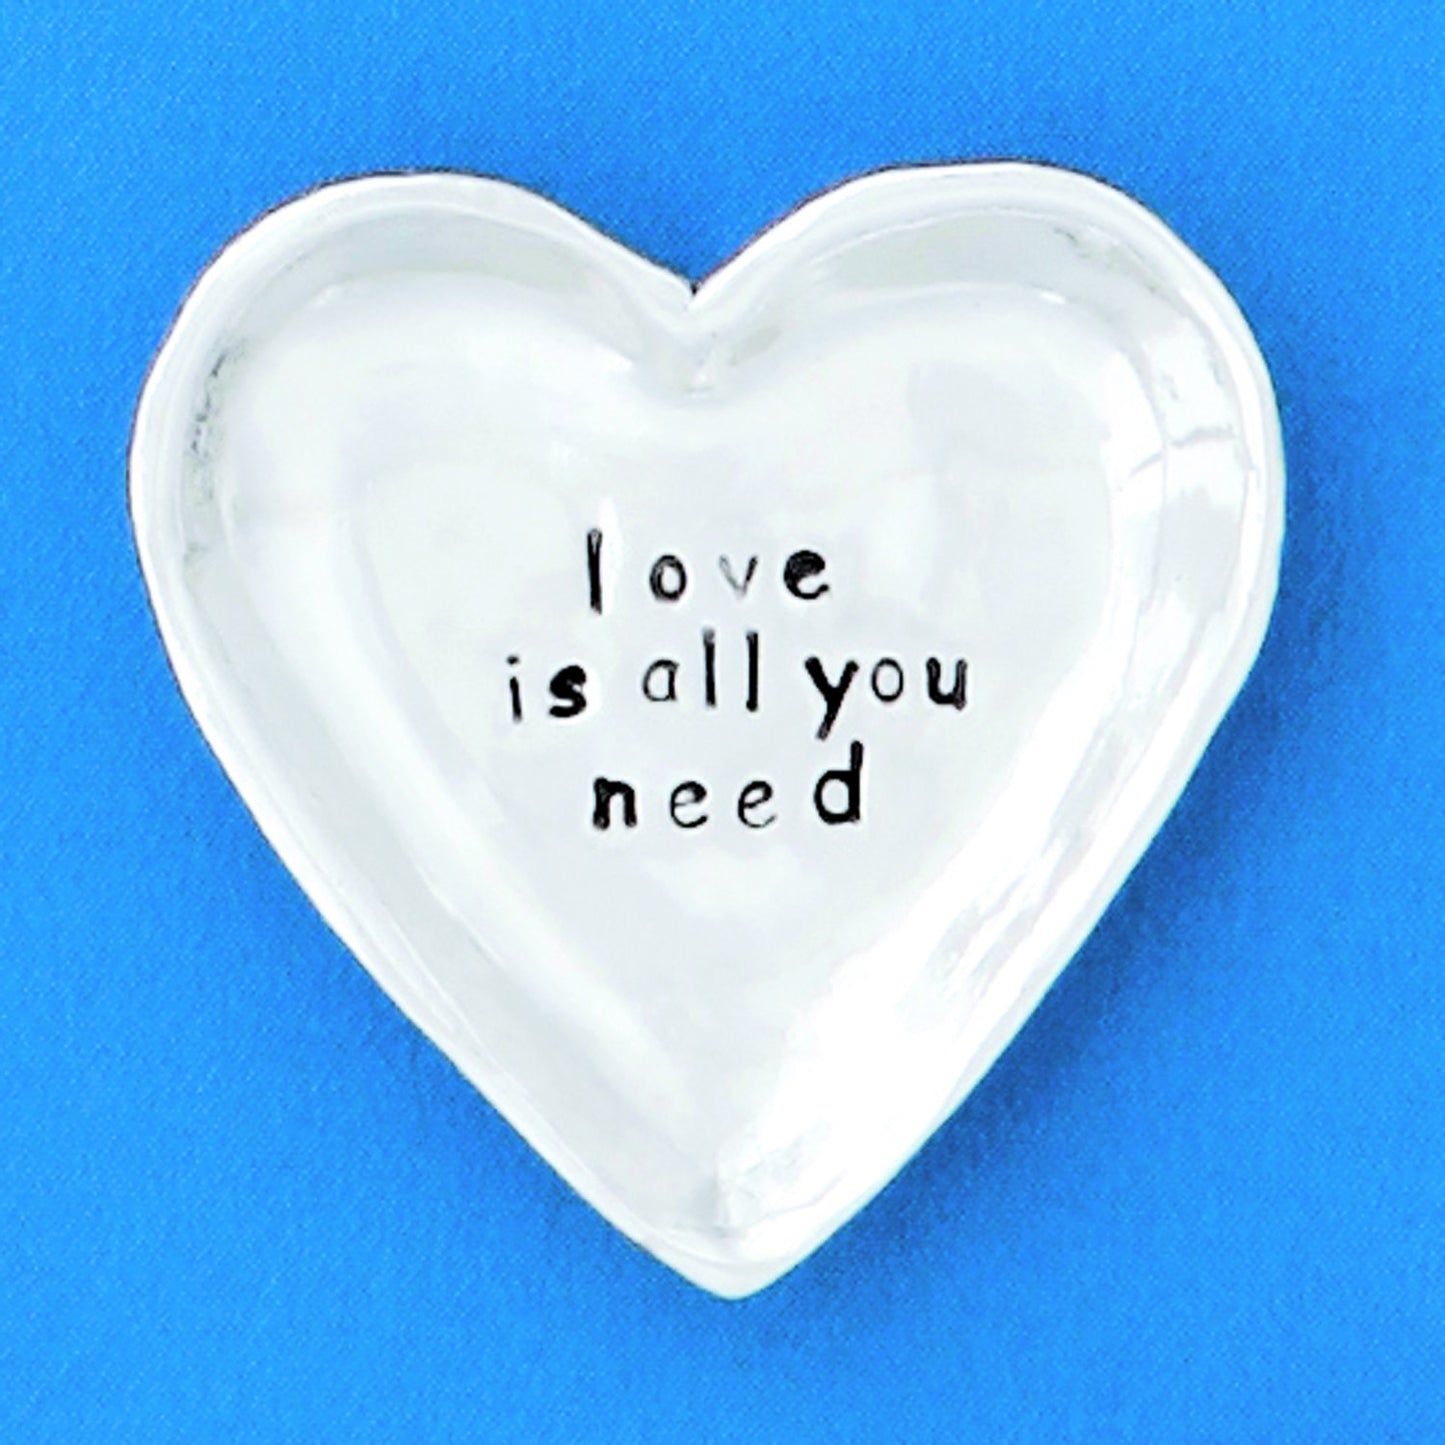 Pewter Heart Shaped Trinket Dish "Love is All You Need" - small